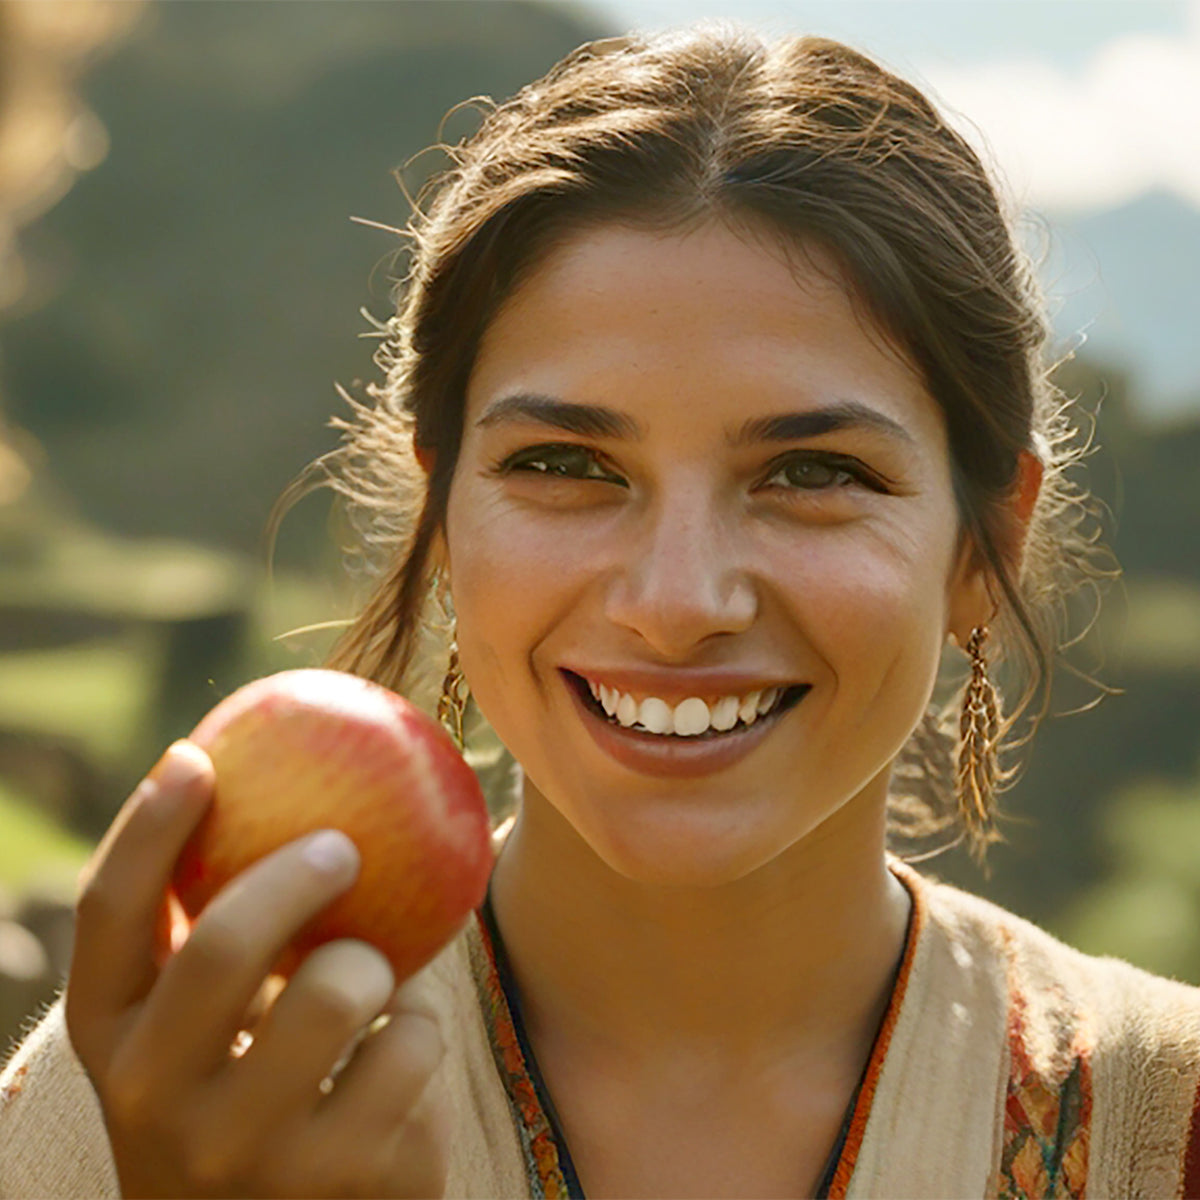 Portrait of a woman with brown hair holding an apple in her hand